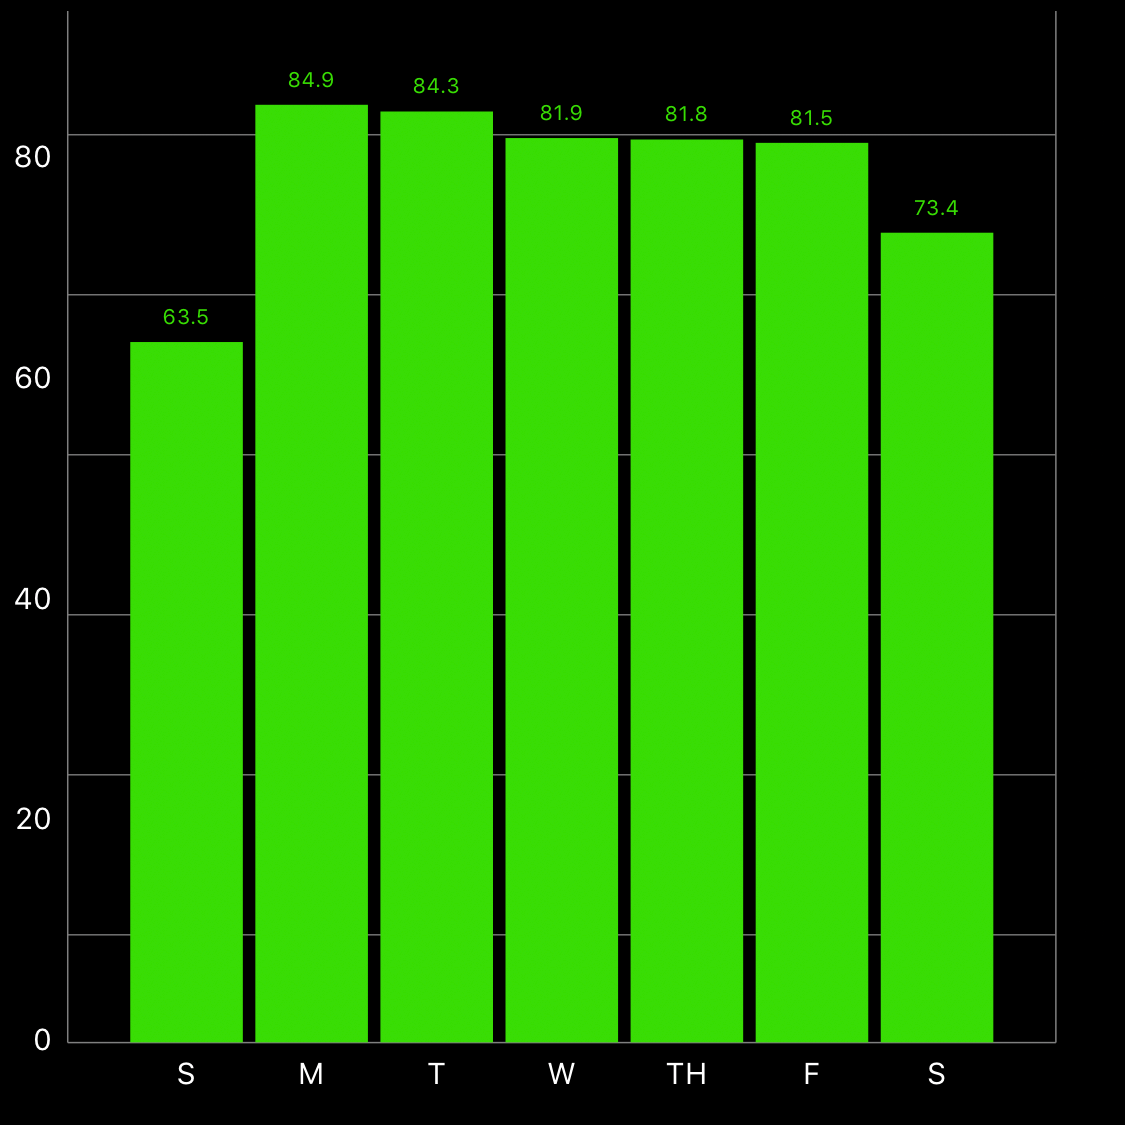 Exercise chart data average throughout the week